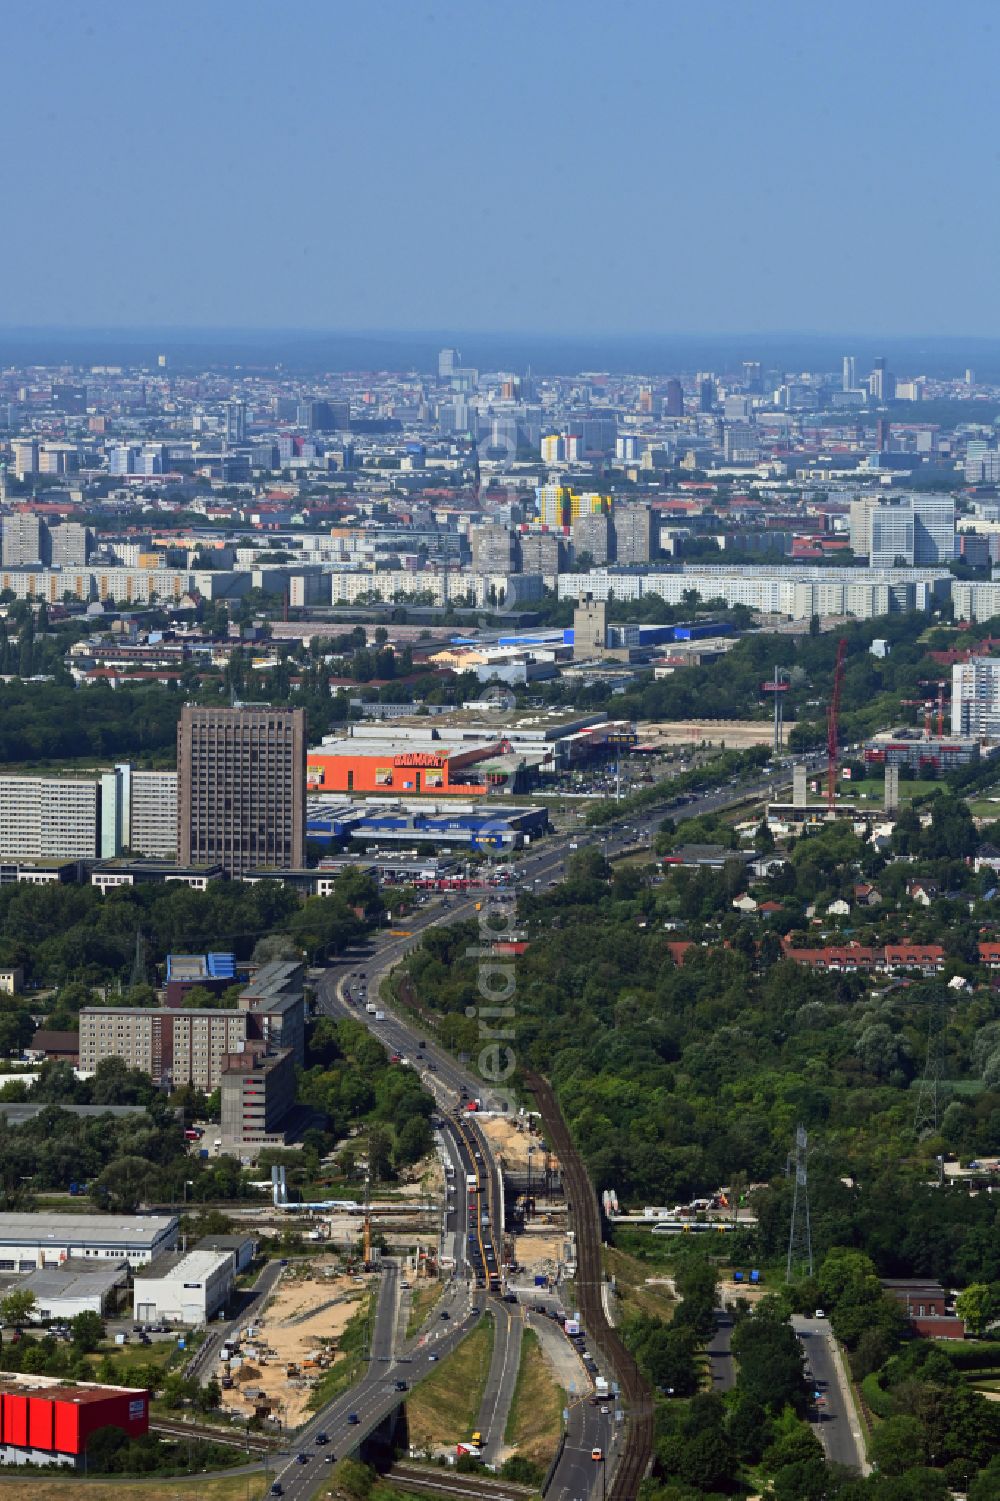 Aerial image Berlin - Construction site for a replacement building for the renovation, renewal and repair of the bridge structure Marzahner Bruecke on Landsberger Allee in the Marzahn district of Berlin, Germany